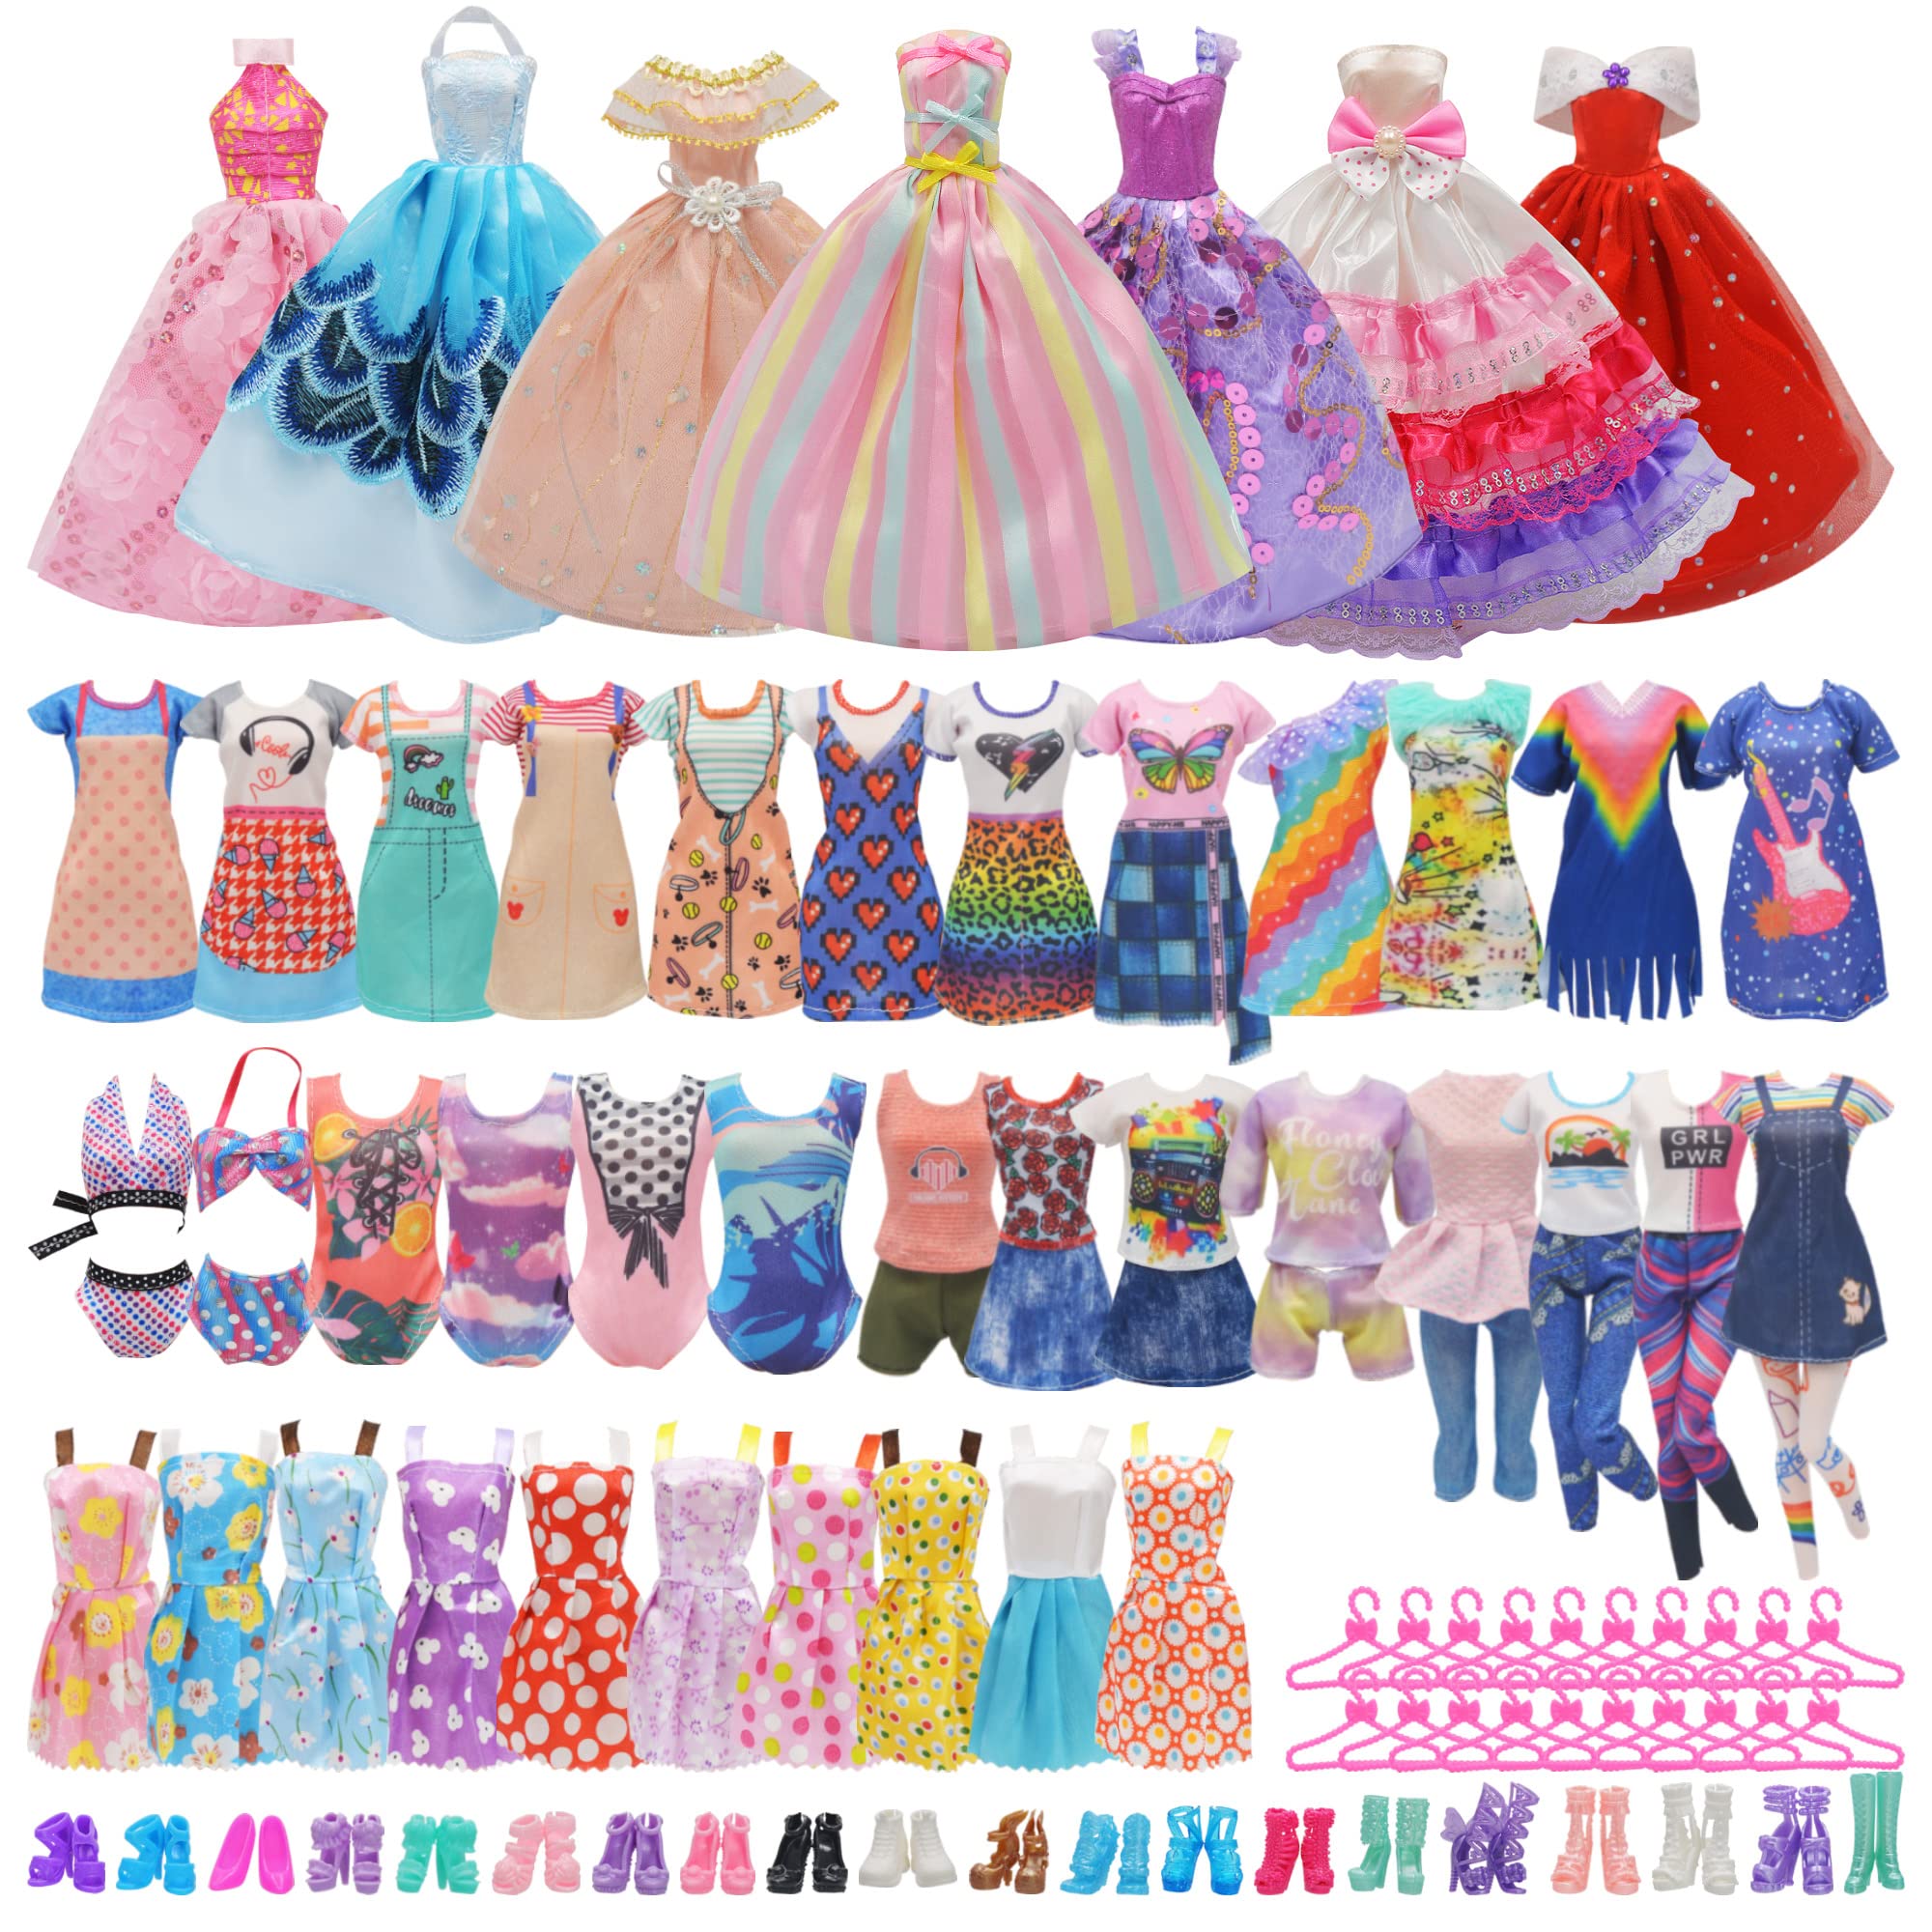 NOKUTIP 161 PCS 11.5 Inch Girl Doll Closet Wardrobe with Clothes and Accessories Including Wardrobe Shoes Rack Clothes Dress Swimsuits Shoes Hangers Crown Necklace and Other Accessories